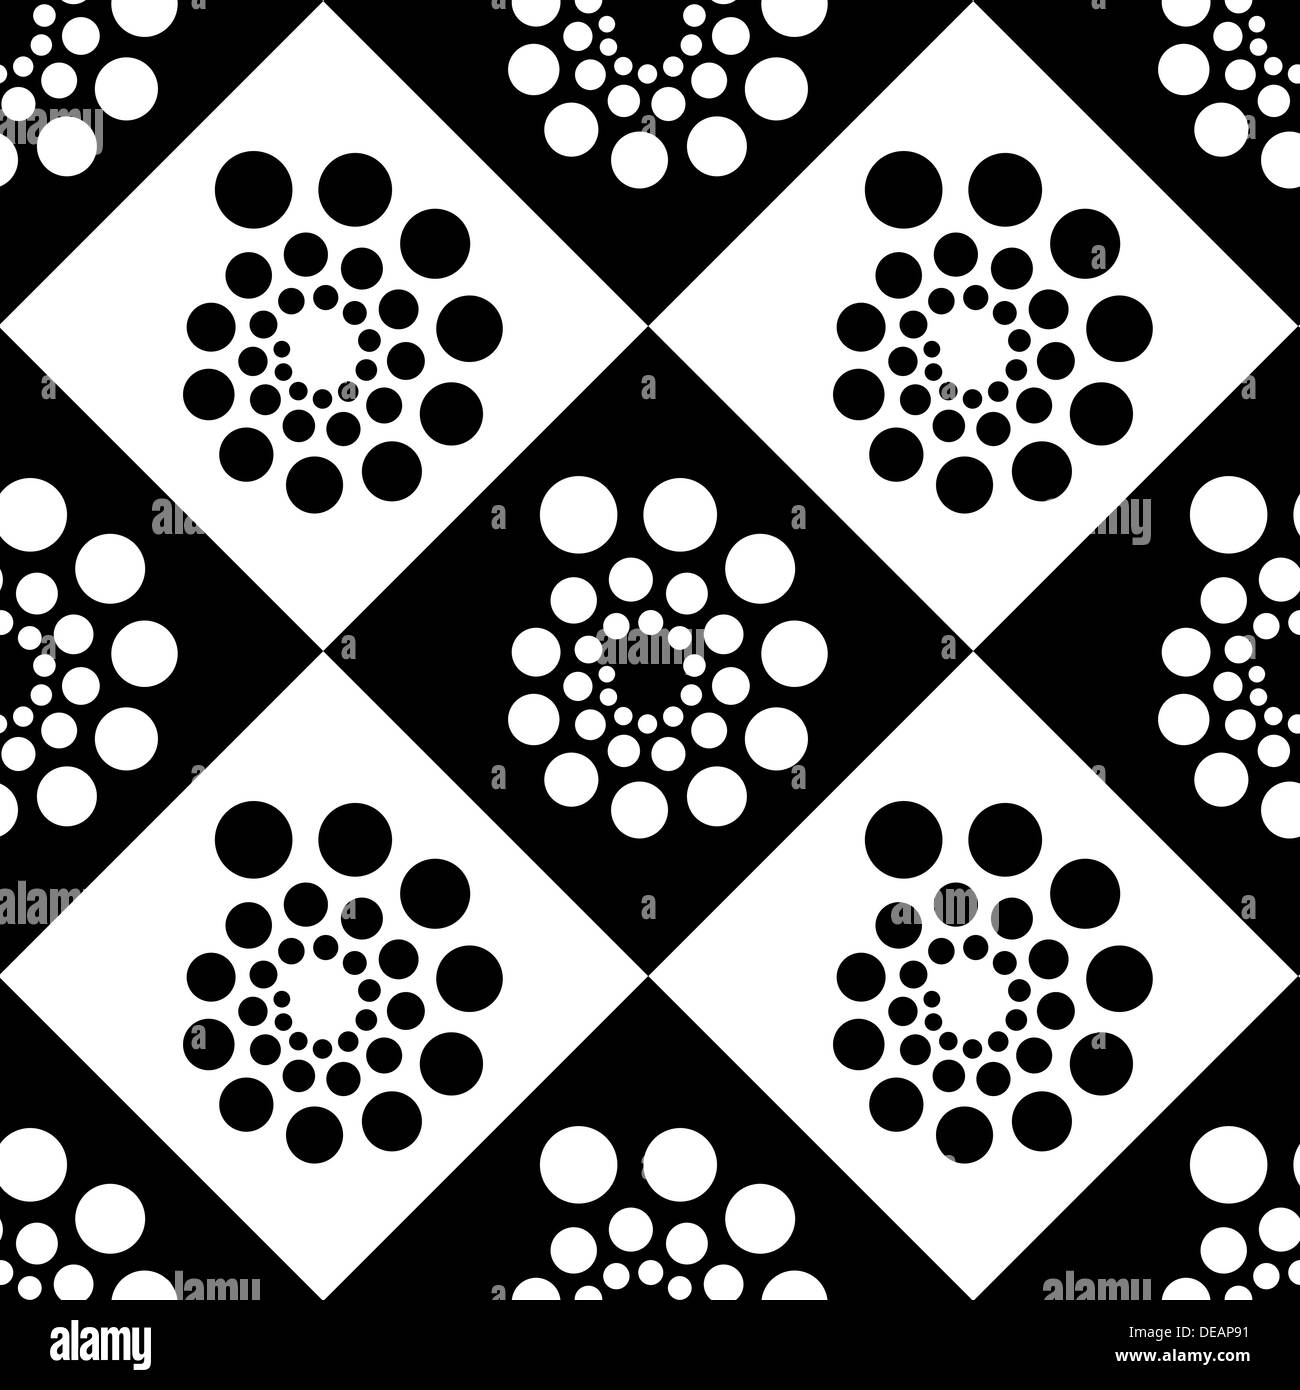 Circles squares Black and White Stock Photos & Images - Page 2 - Alamy